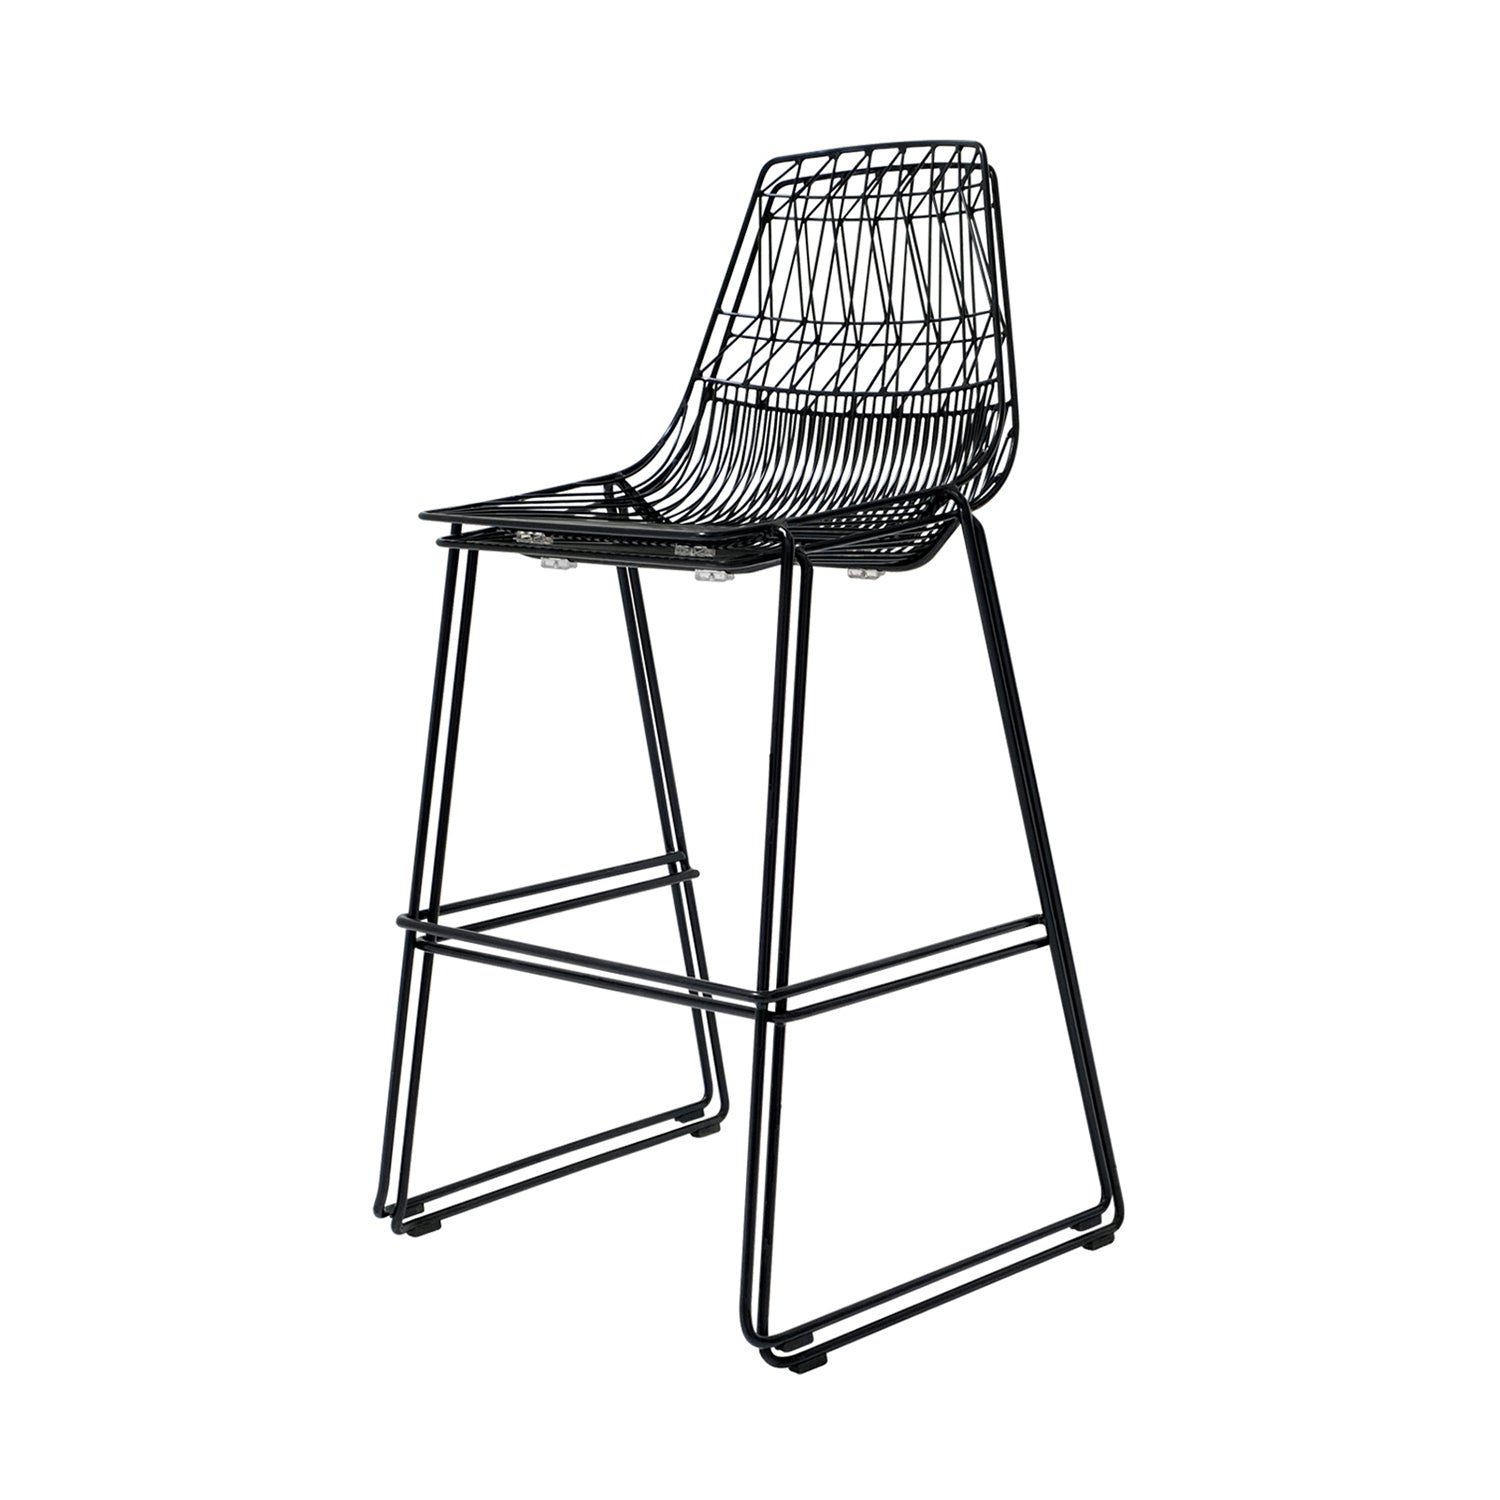 Lucy Stacking Bar + Counter Stool: Bar + Black + Without Seat Pad